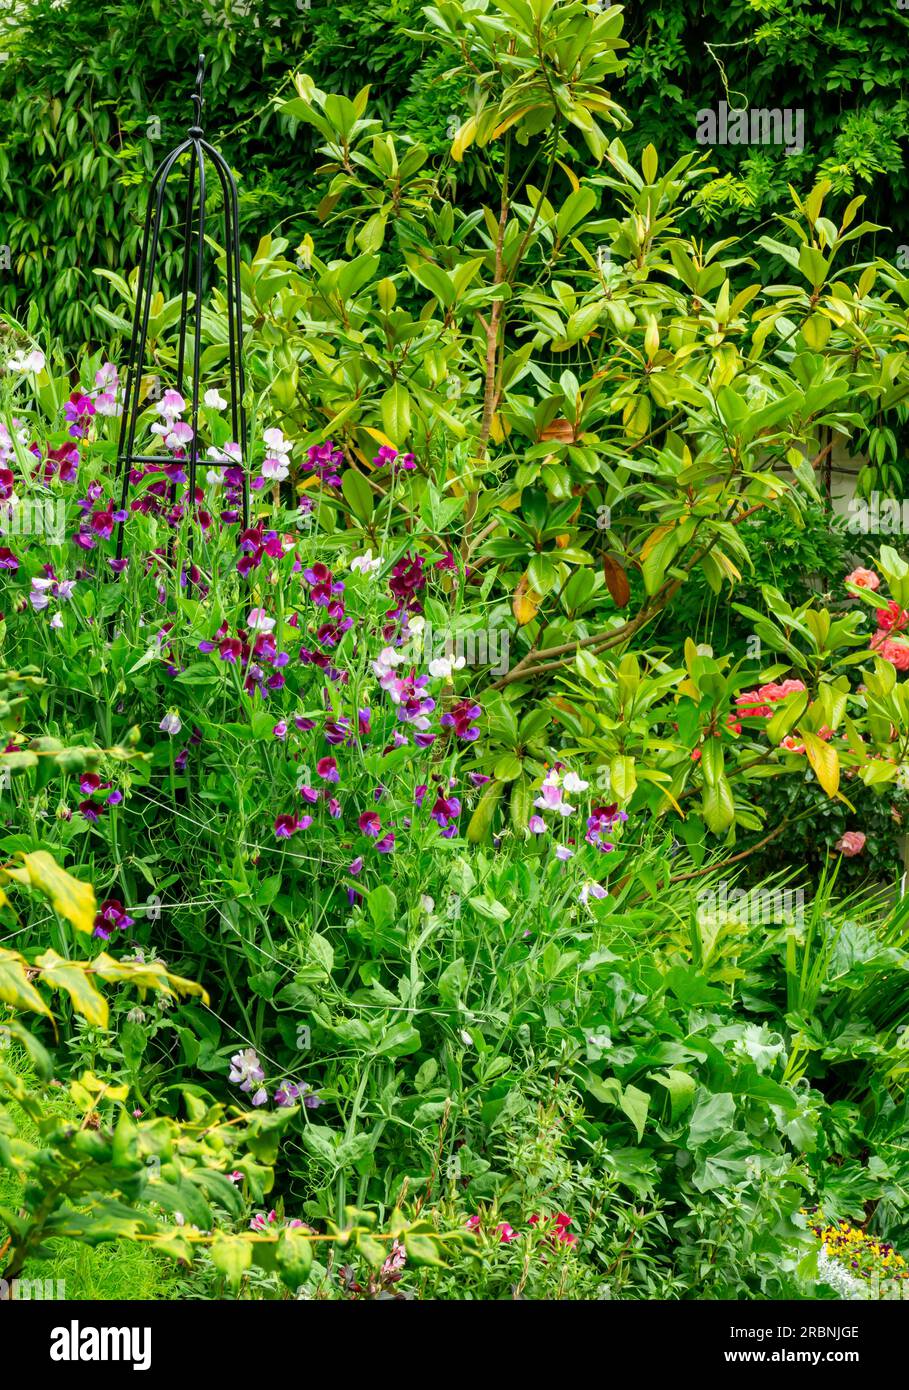 Garden borders - sweet pea, Lathyrus odoratus, is a flowering plant in the genus Lathyrus in the family Fabaceae (legumes), native to southern Europe. Stock Photo